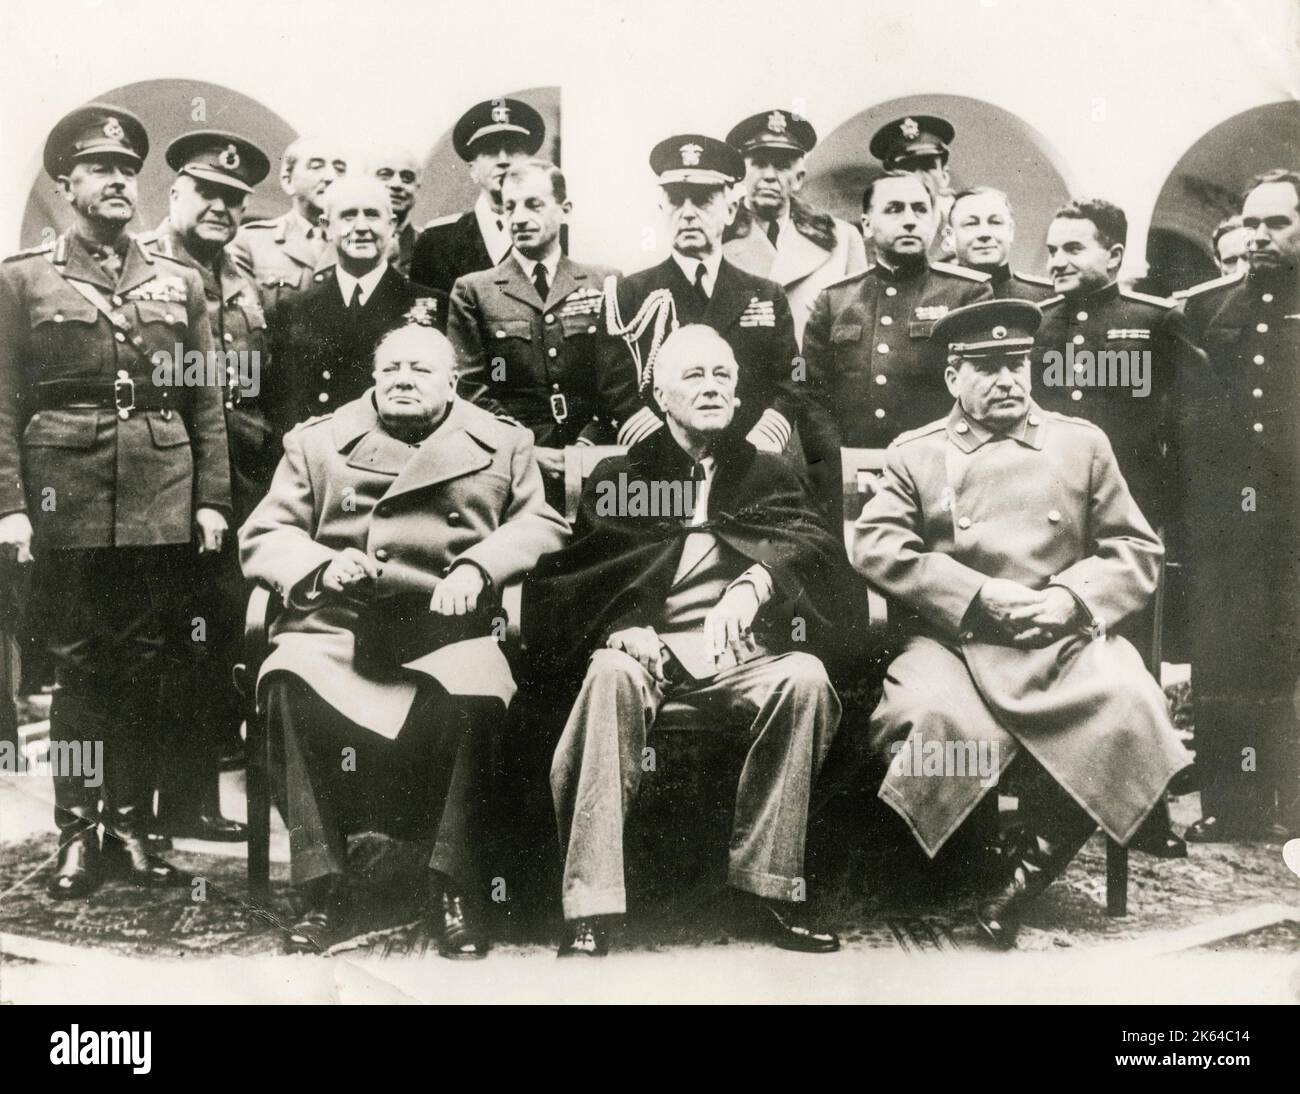 Vintage World War II photograph: The Yalta Conference, also known as the Crimea Conference and code-named Argonaut, held February 4-11, 1945, was the World War II meeting of the heads of government of the United States, the United Kingdom, and the Soviet Union to discuss the postwar reorganization of Germany and Europe. The three states were represented by President Franklin D. Roosevelt, Prime Minister Winston Churchill, and Premier Joseph Stalin, respectively. The conference was held near Yalta in Crimea, Soviet Union, within the Livadia, Yusupov, and Vorontsov Palaces. Stock Photo